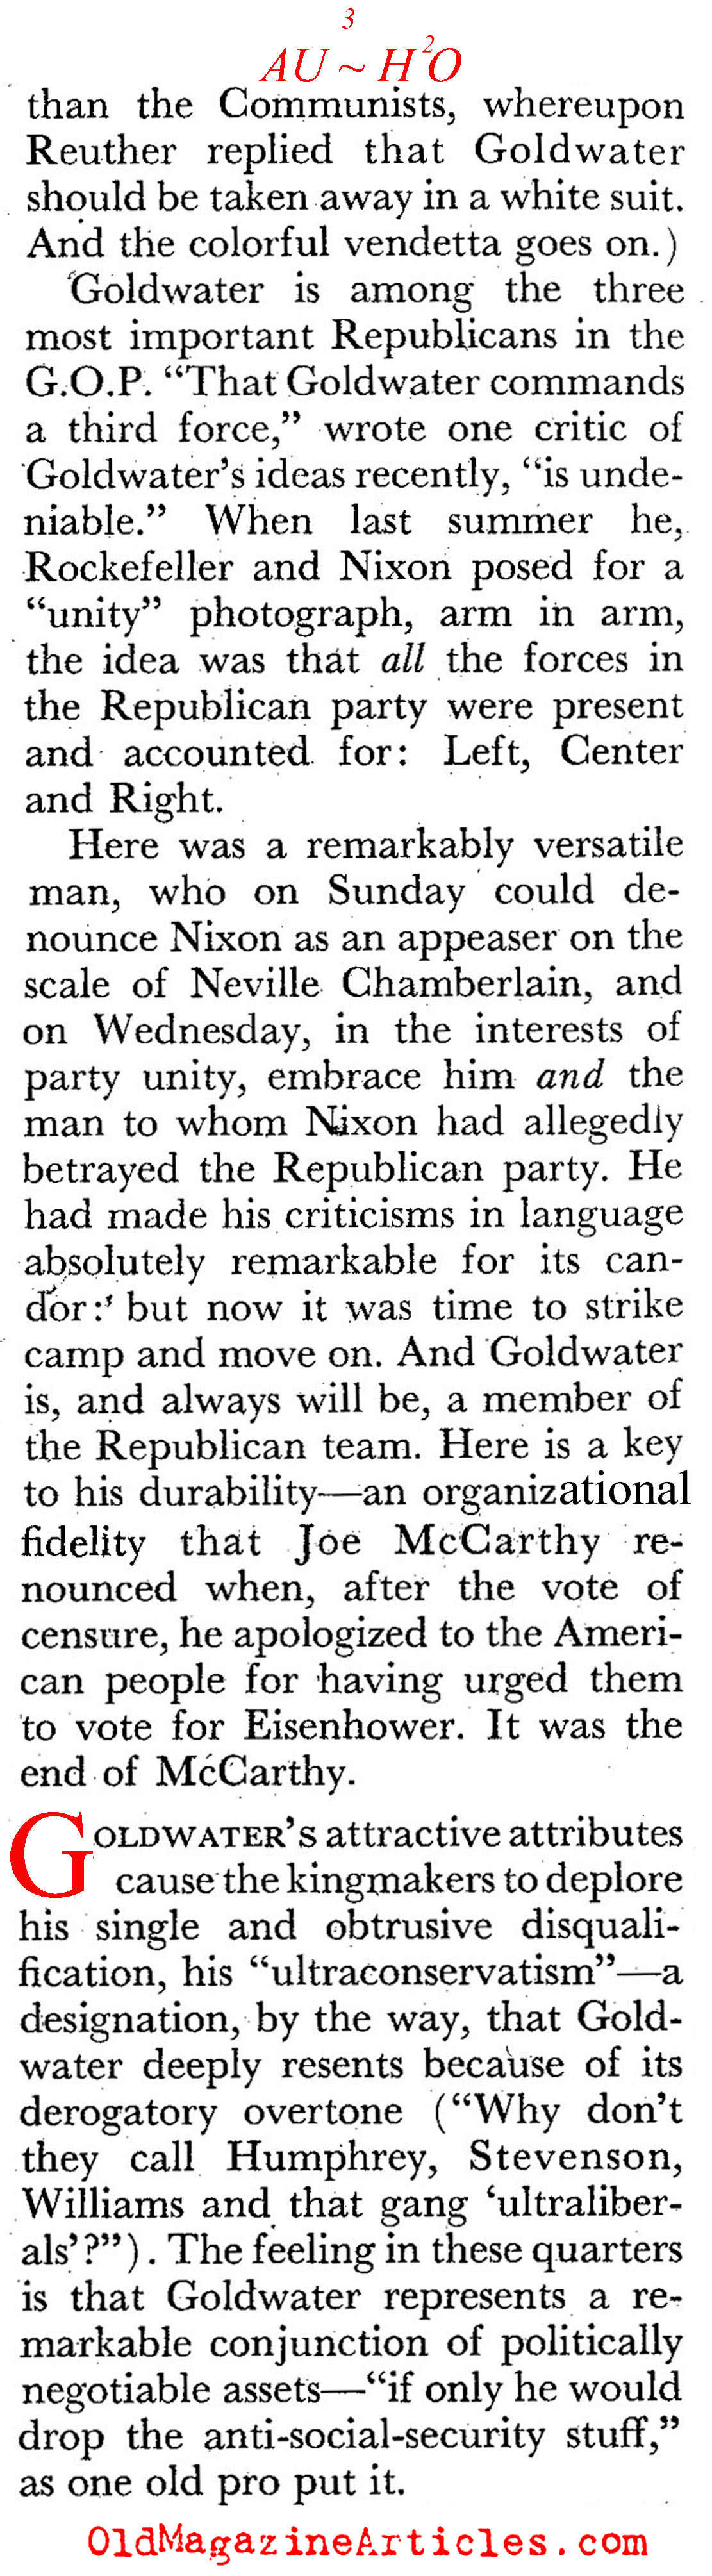 The Father of American Conservativism (Coronet Magazine, 1961)